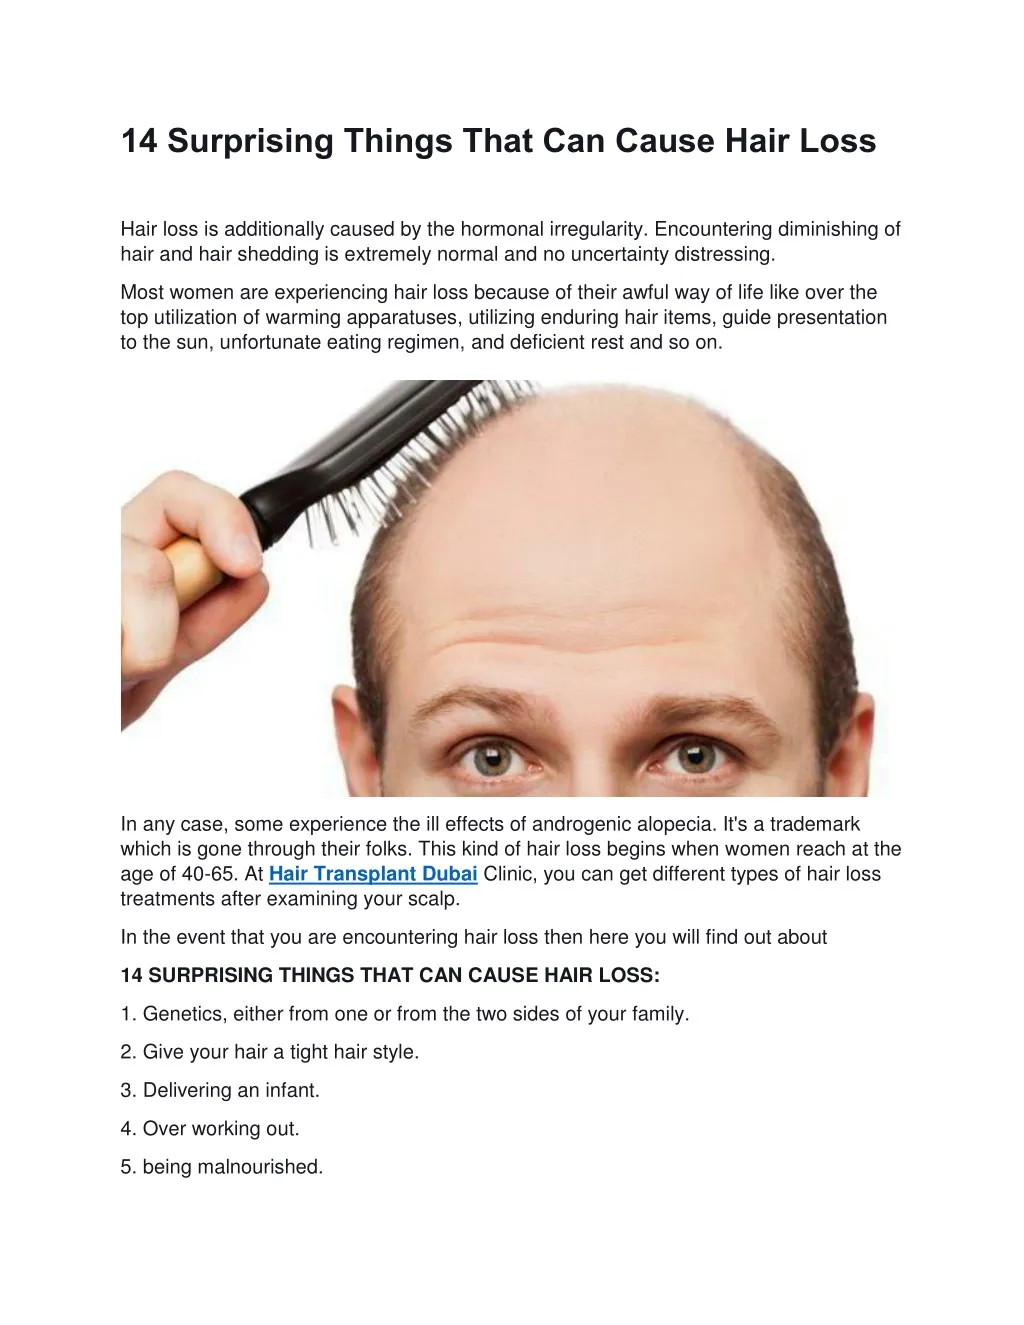 14 surprising things that can cause hair loss